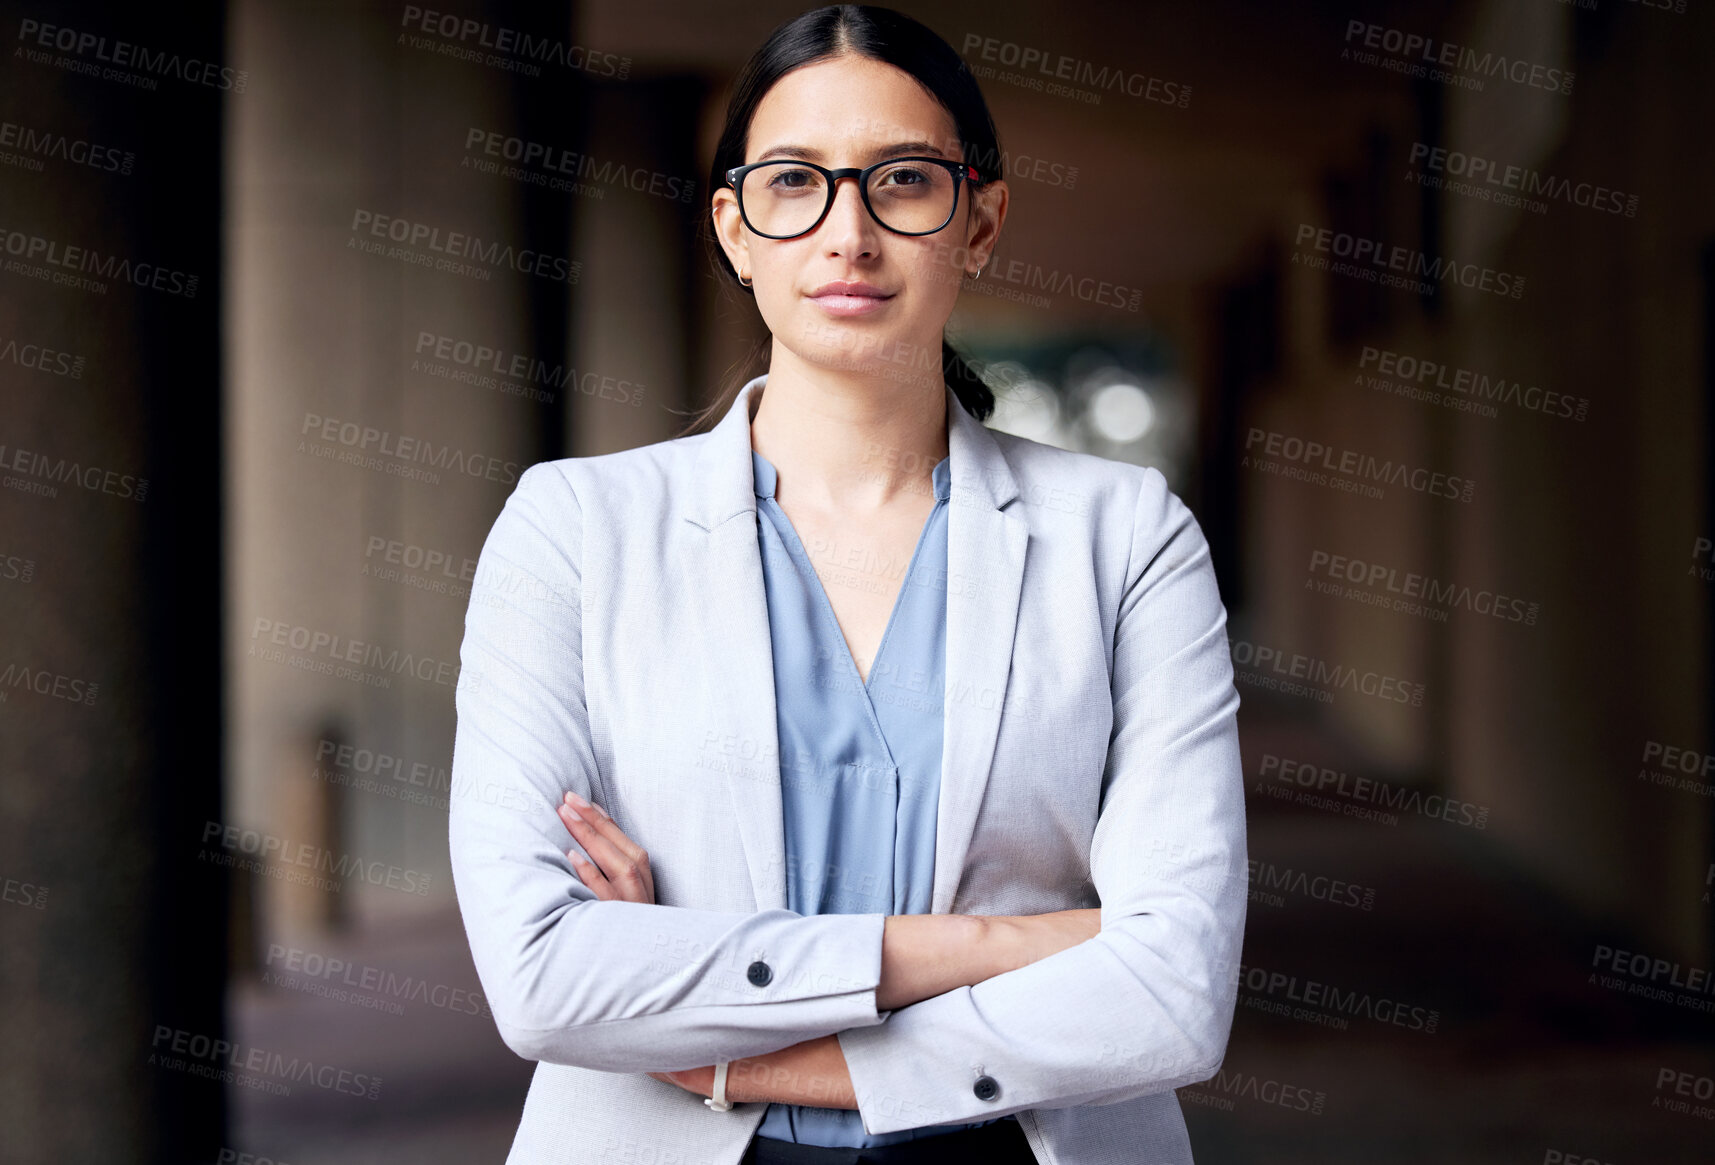 Buy stock photo Outdoor, portrait or serious businesswoman with arms crossed, confidence or suit in firm or company. City, corporate attorney or proud female lawyer with glasses ready for career, job or opportunity